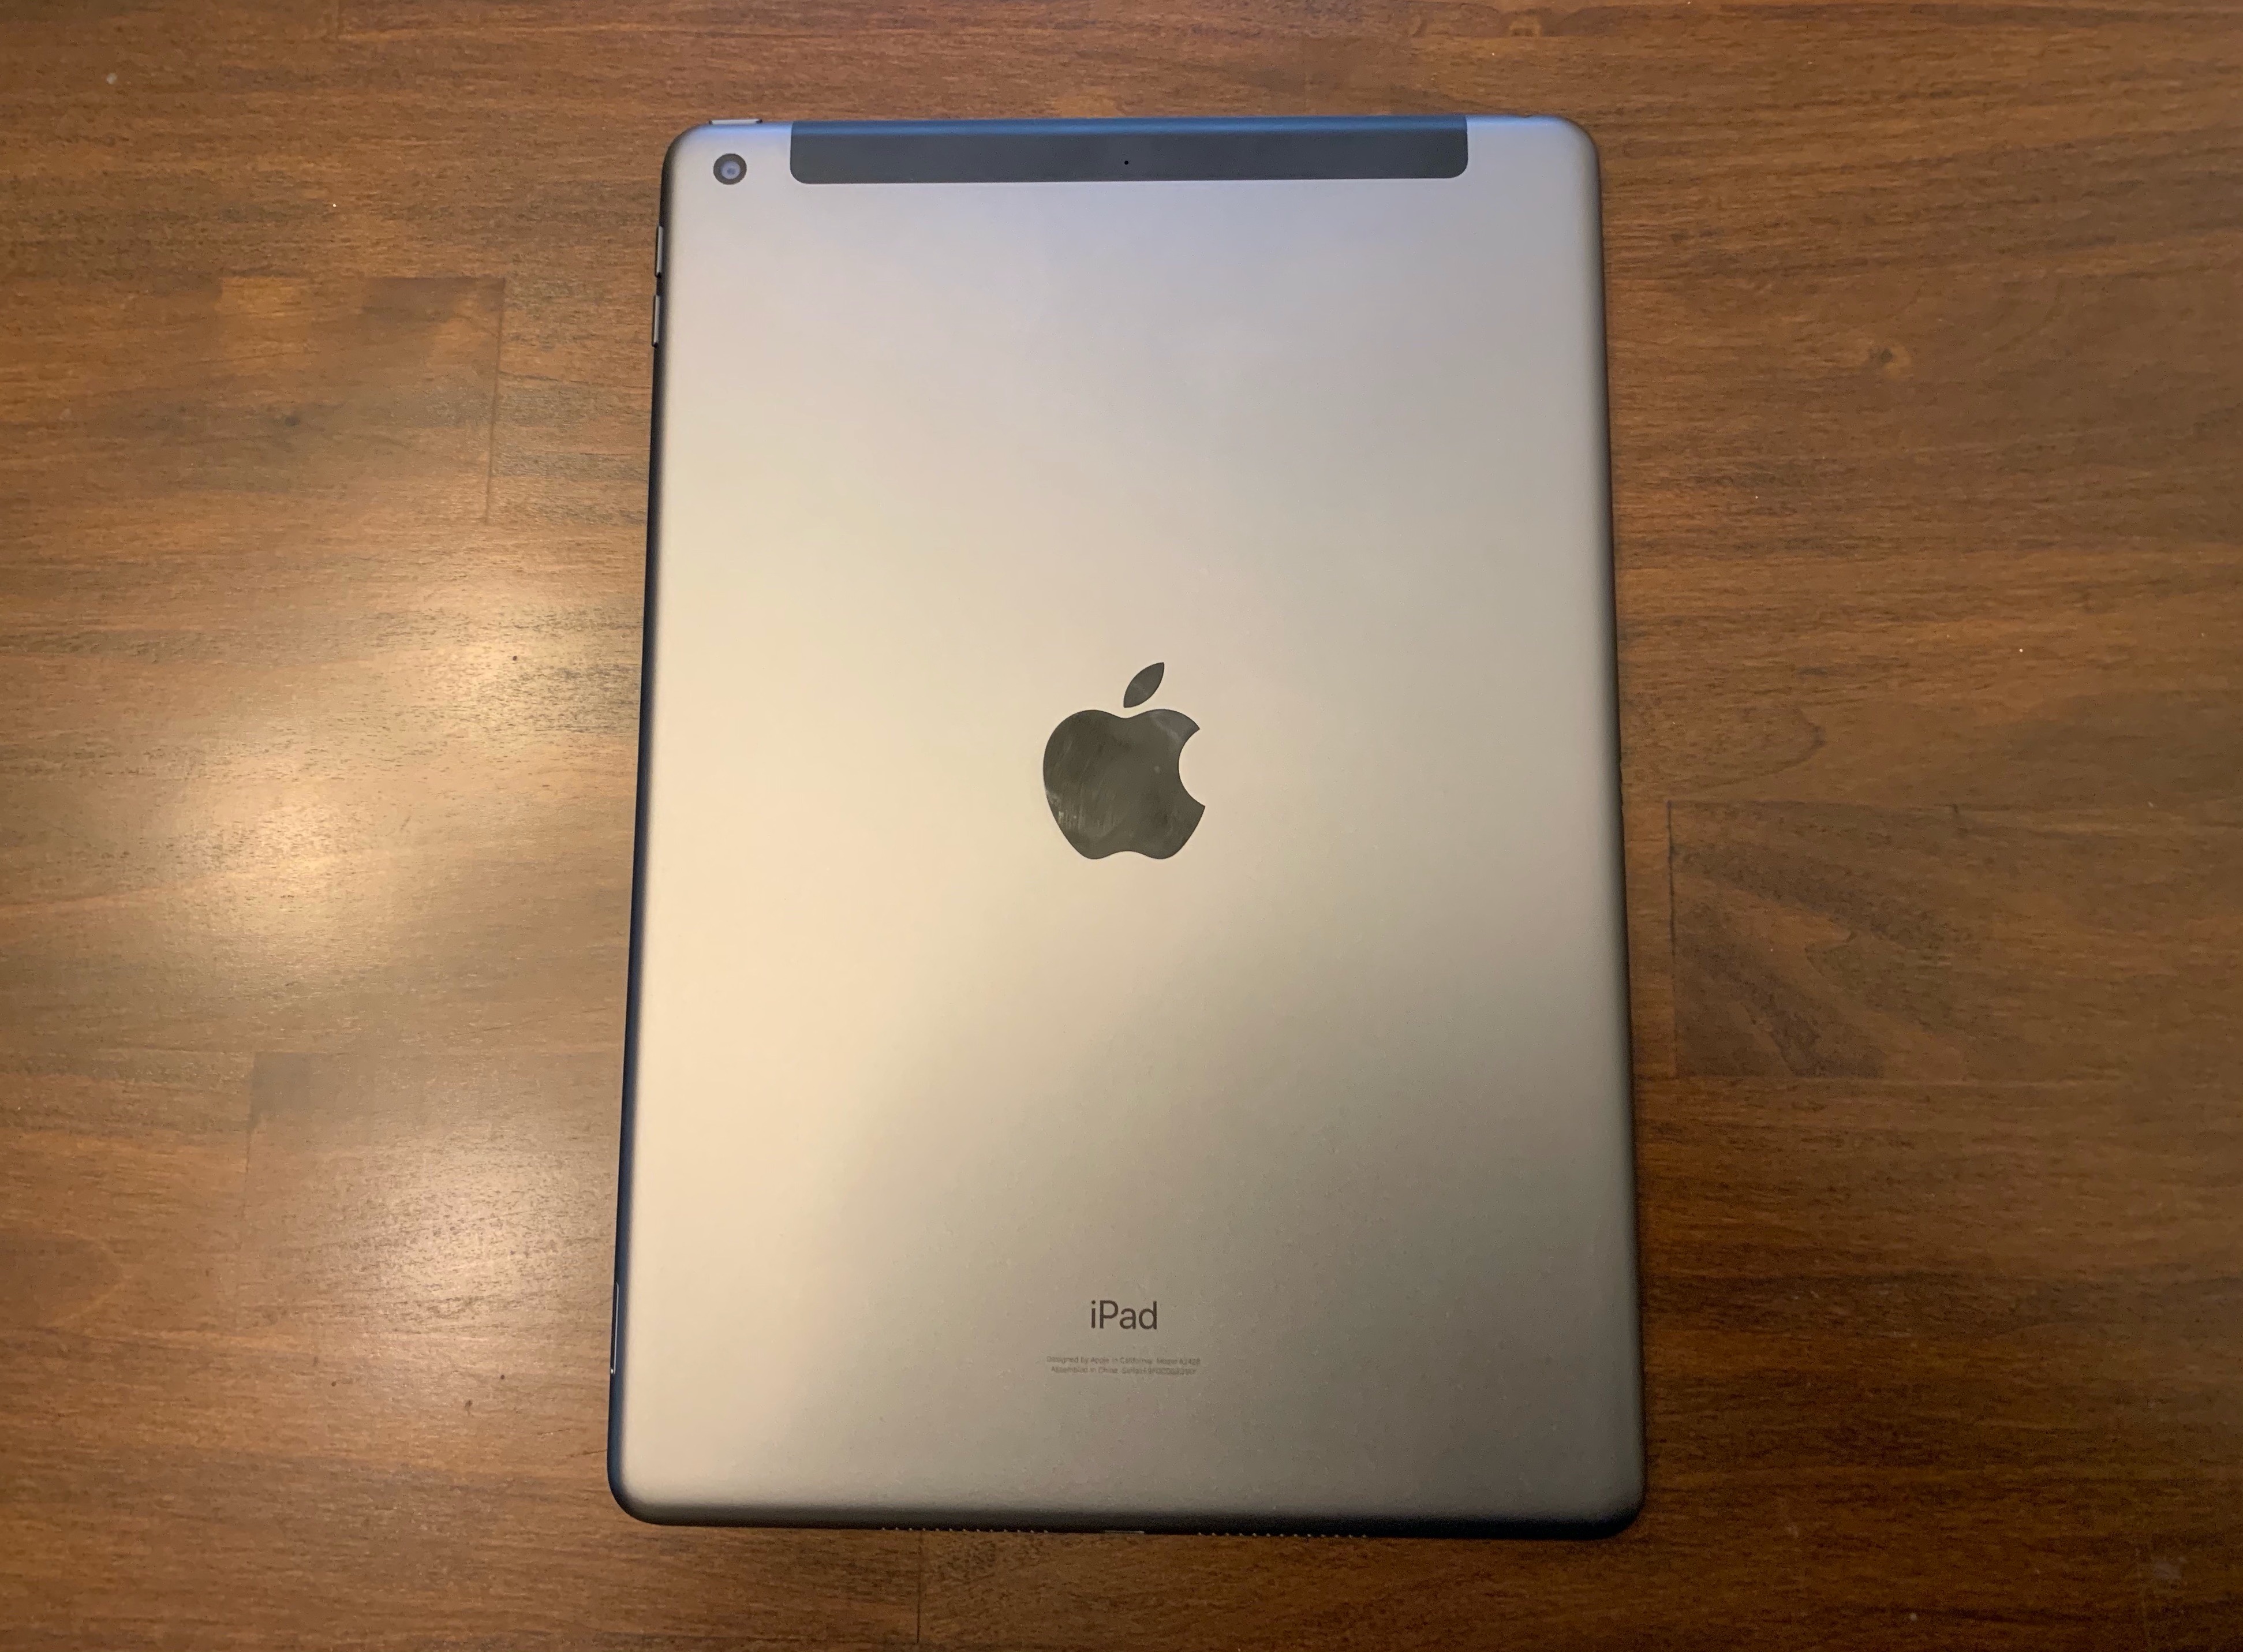 iPad (2020) micro-review: Battle-tested and more than fast enough